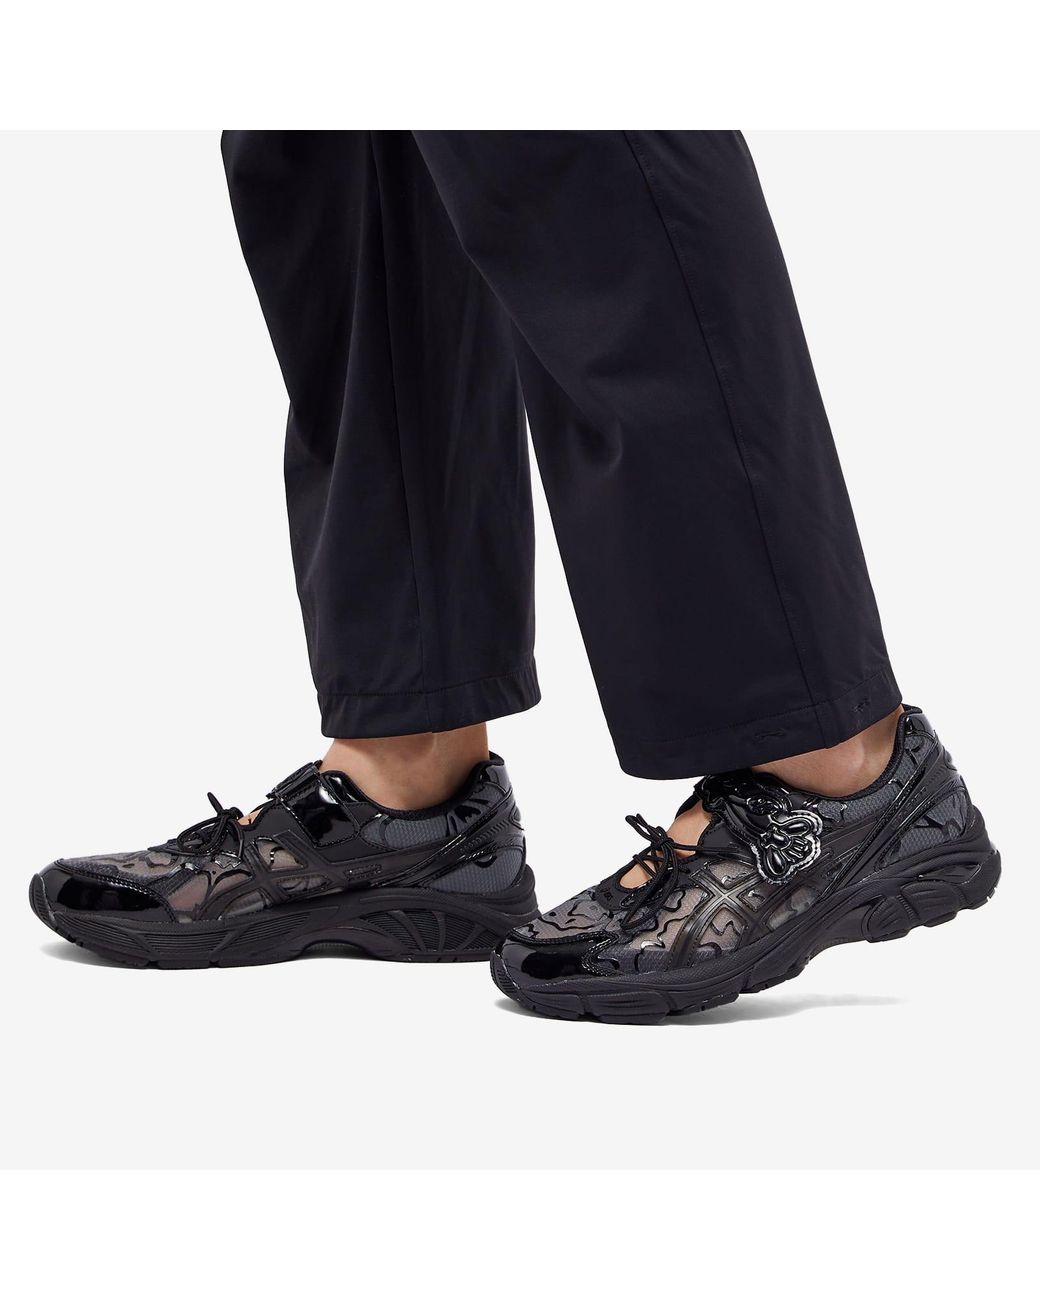 Asics X Cecilie Bahnsen Gt-2160 Sneakers in Black | Lyst